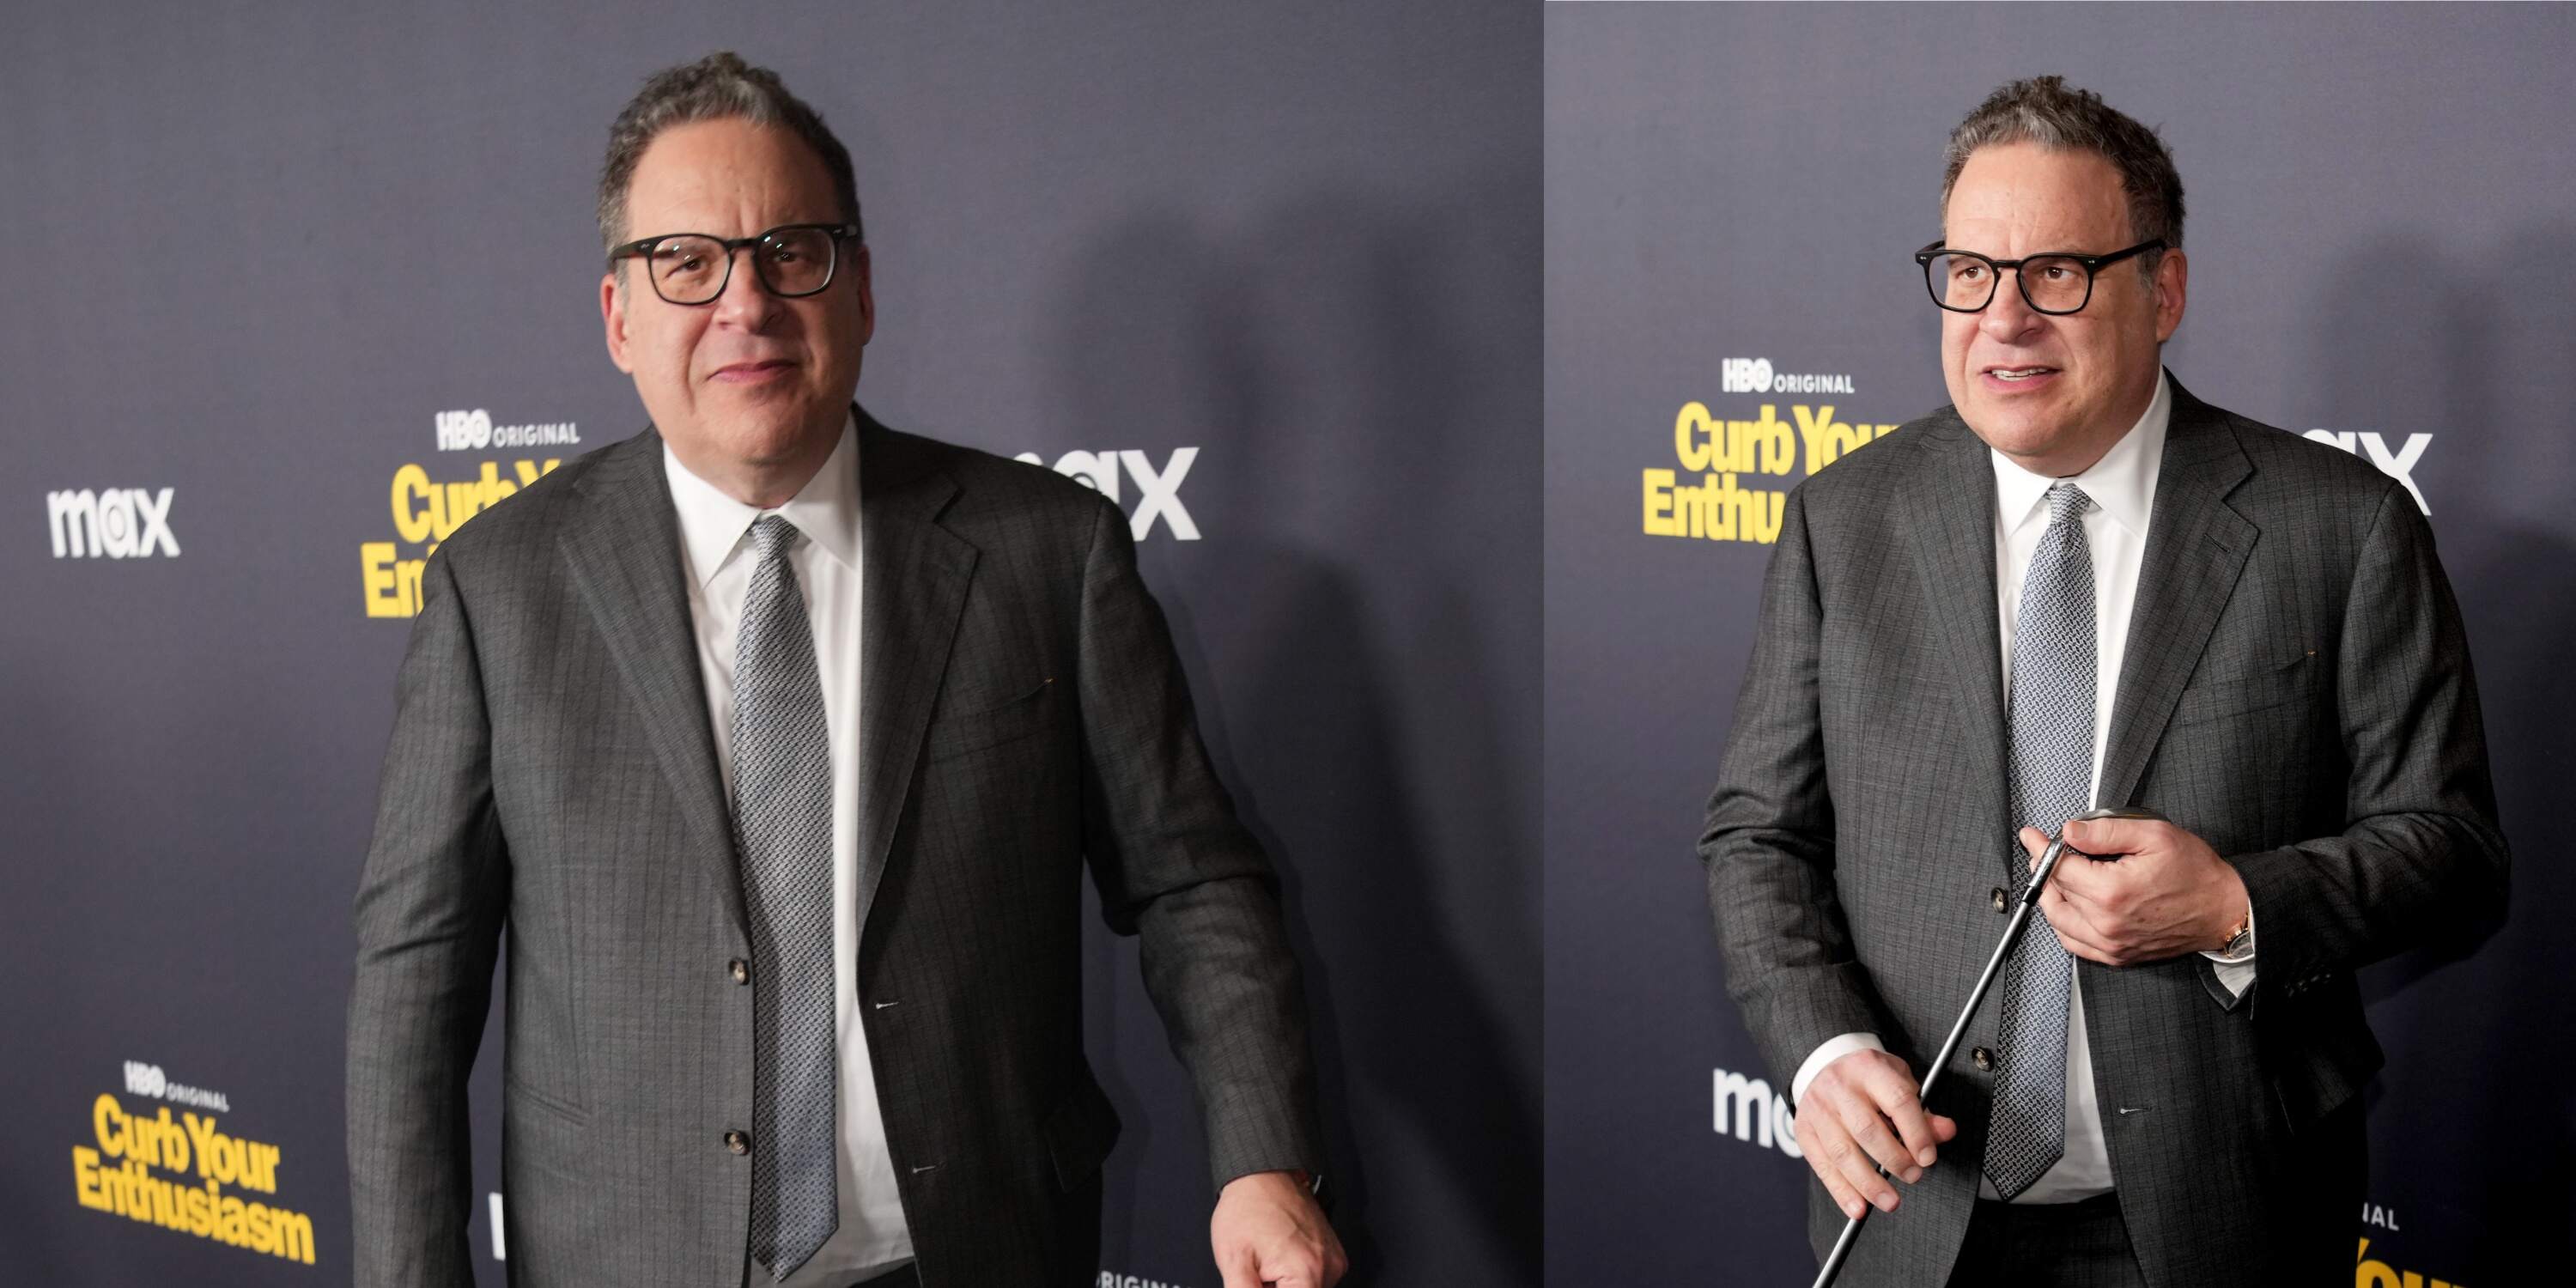 Curb Your Enthusiasm star Jeff Garlin holds a golf club like a cane while walking the red carpet